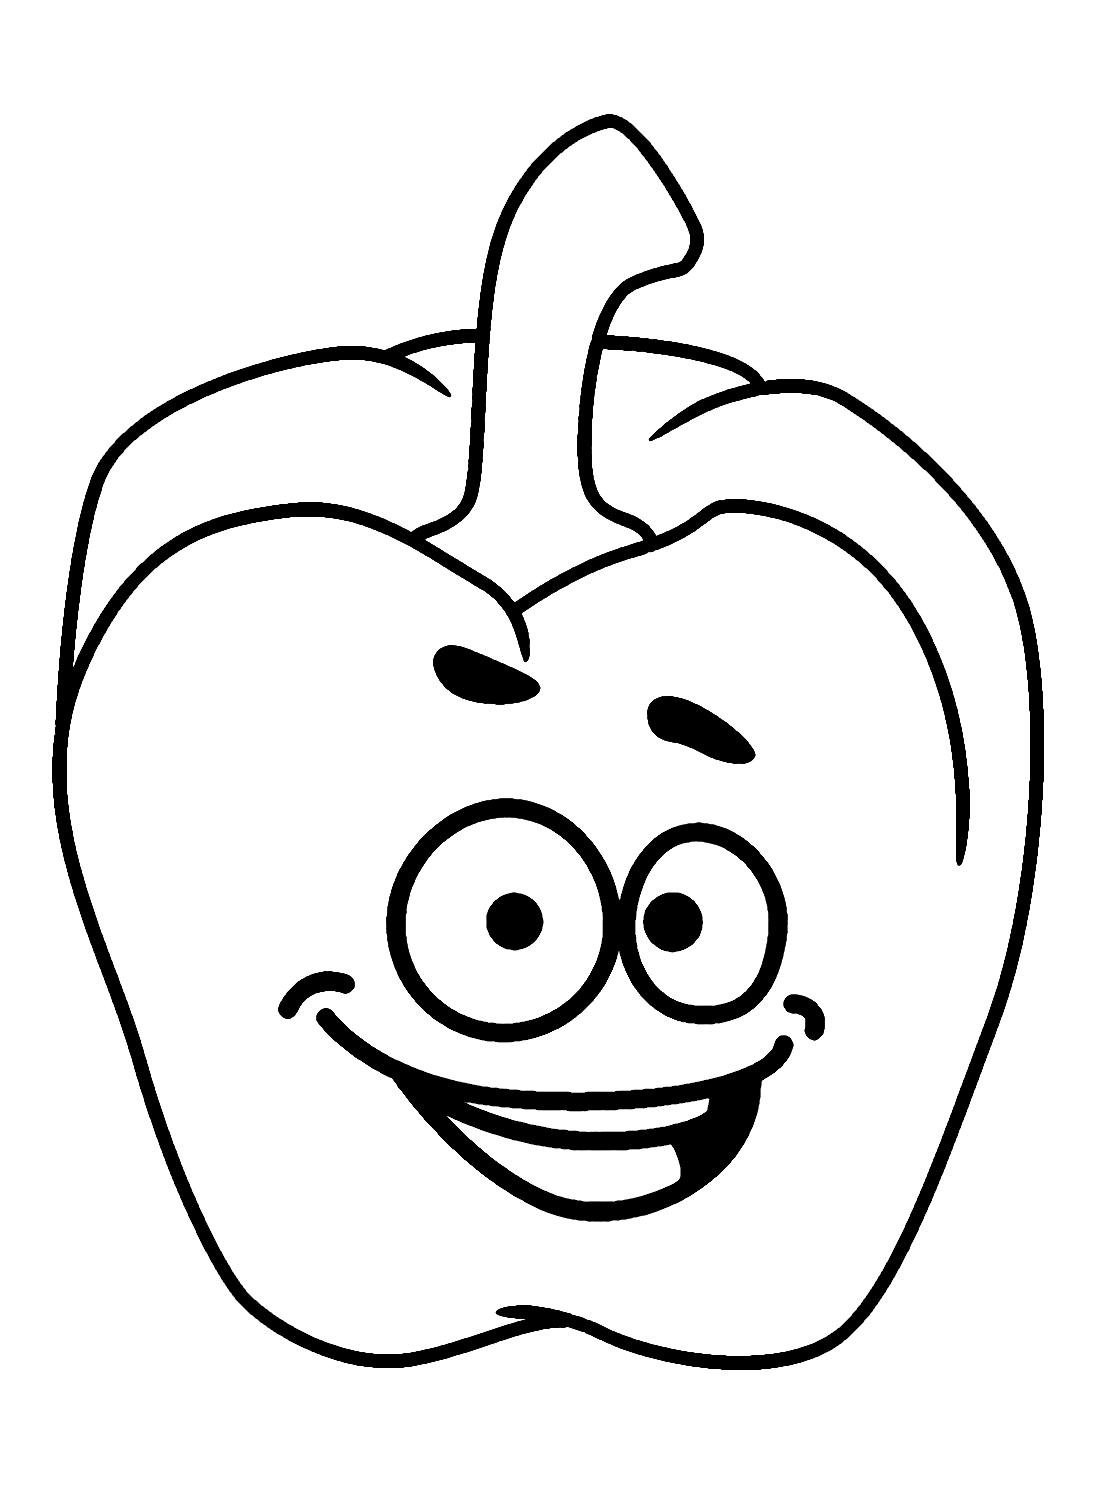 Happy Bell Pepper Coloring Page